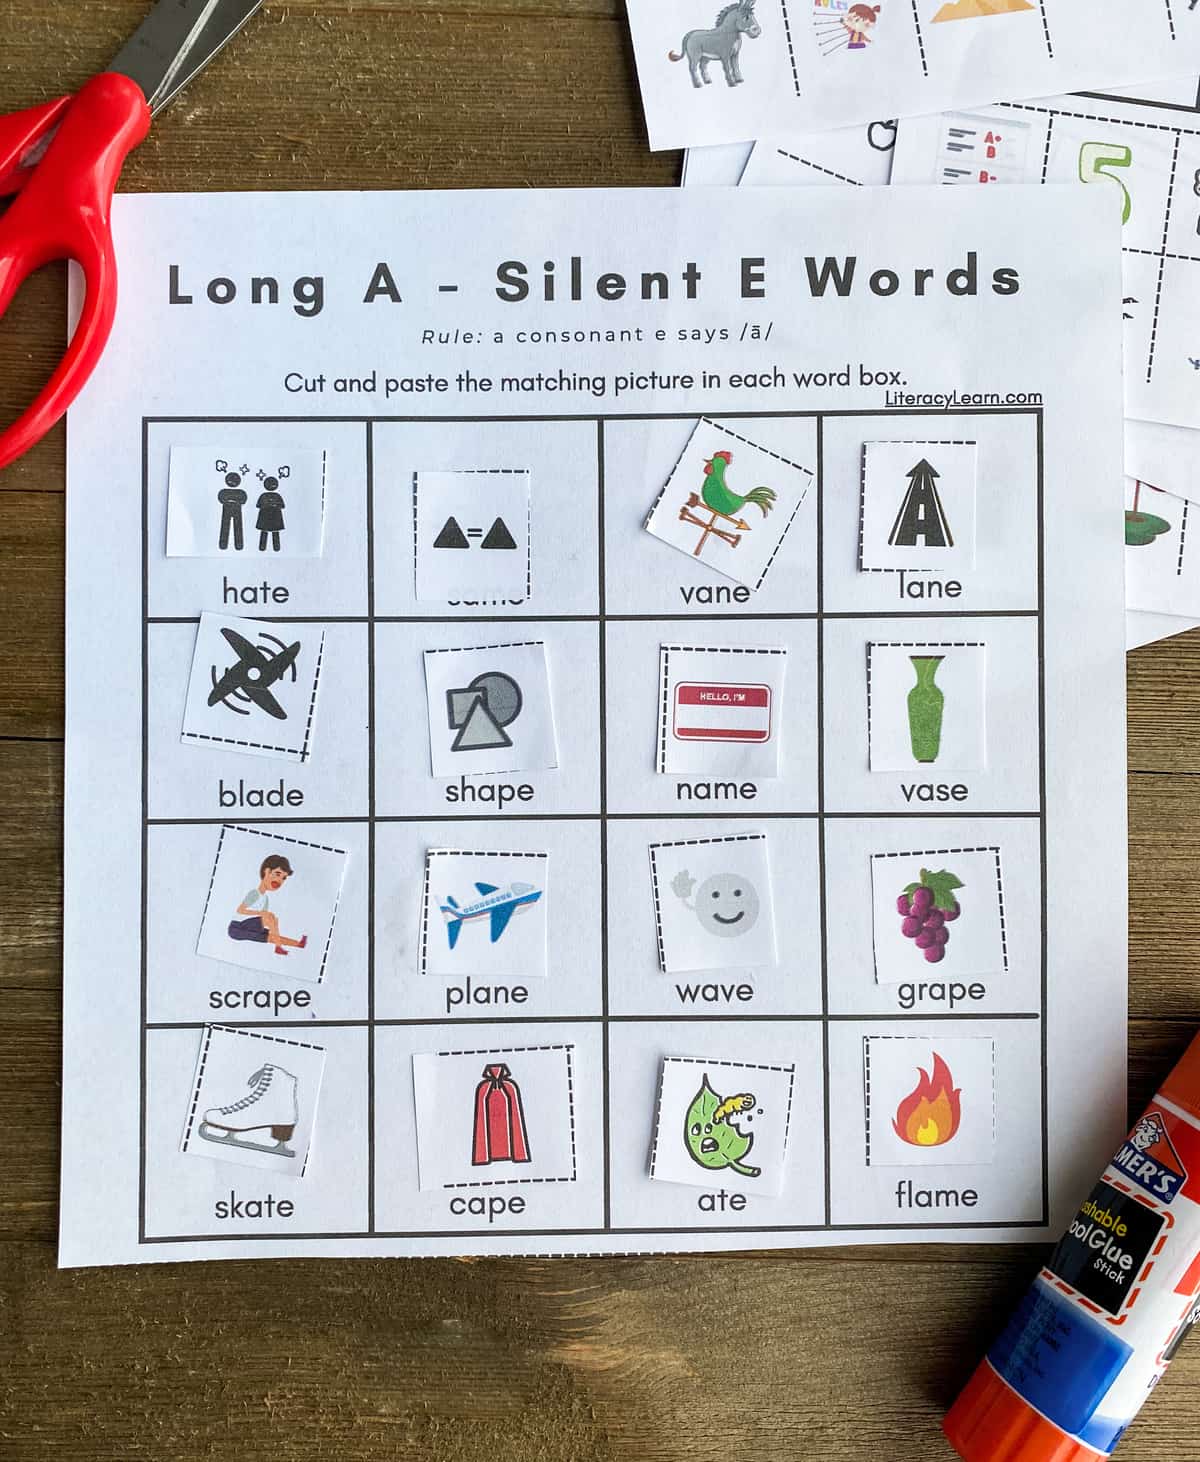 A completed Silent A word picture match worksheet with a glue stick and scissors. 